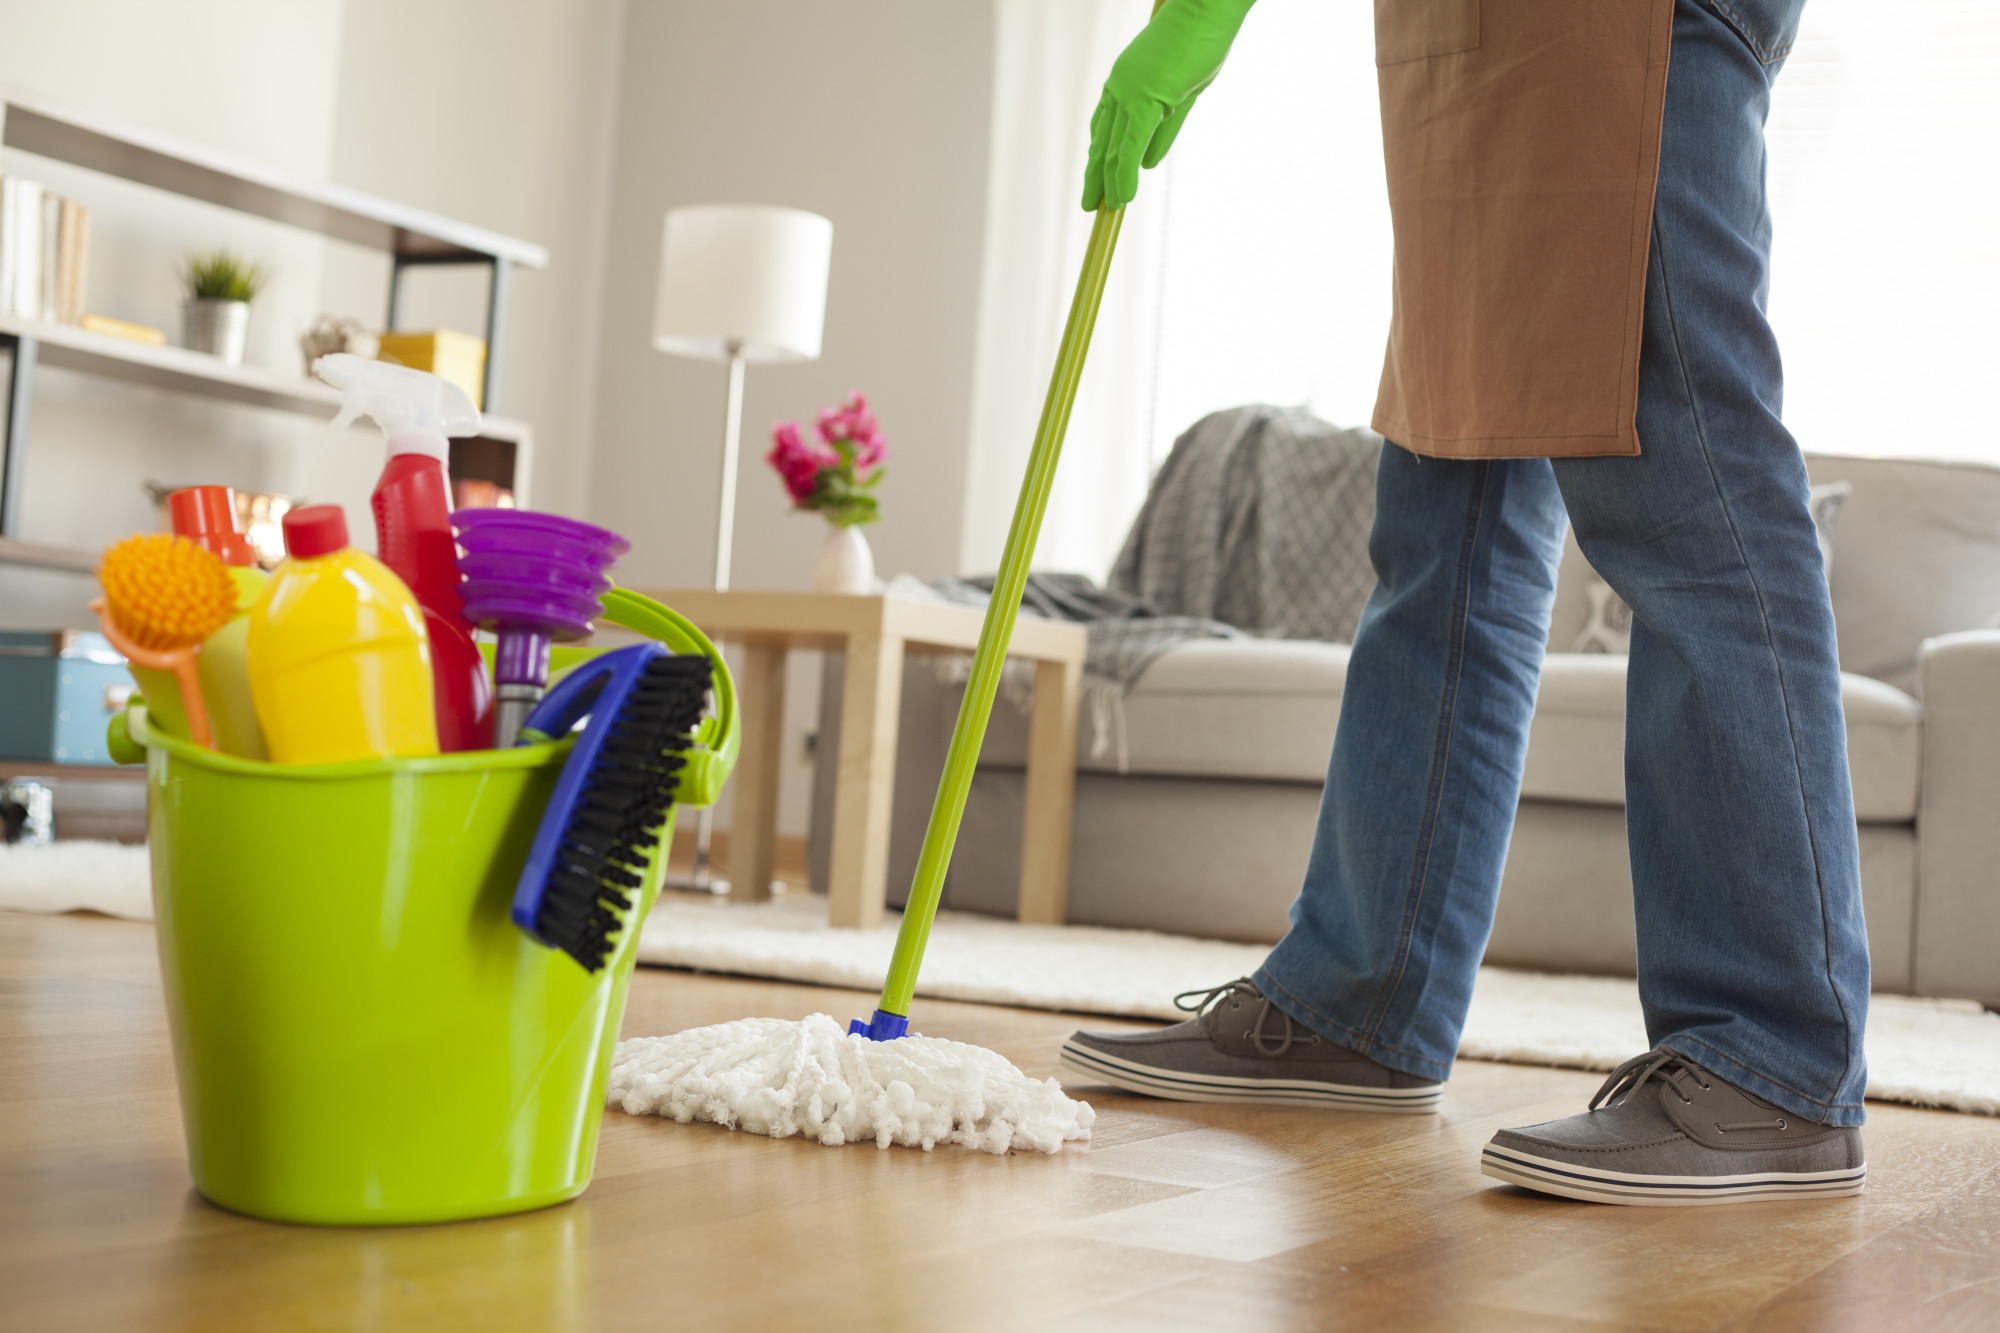 “Health at Home: The Importance of Cleanliness for Well-Being”